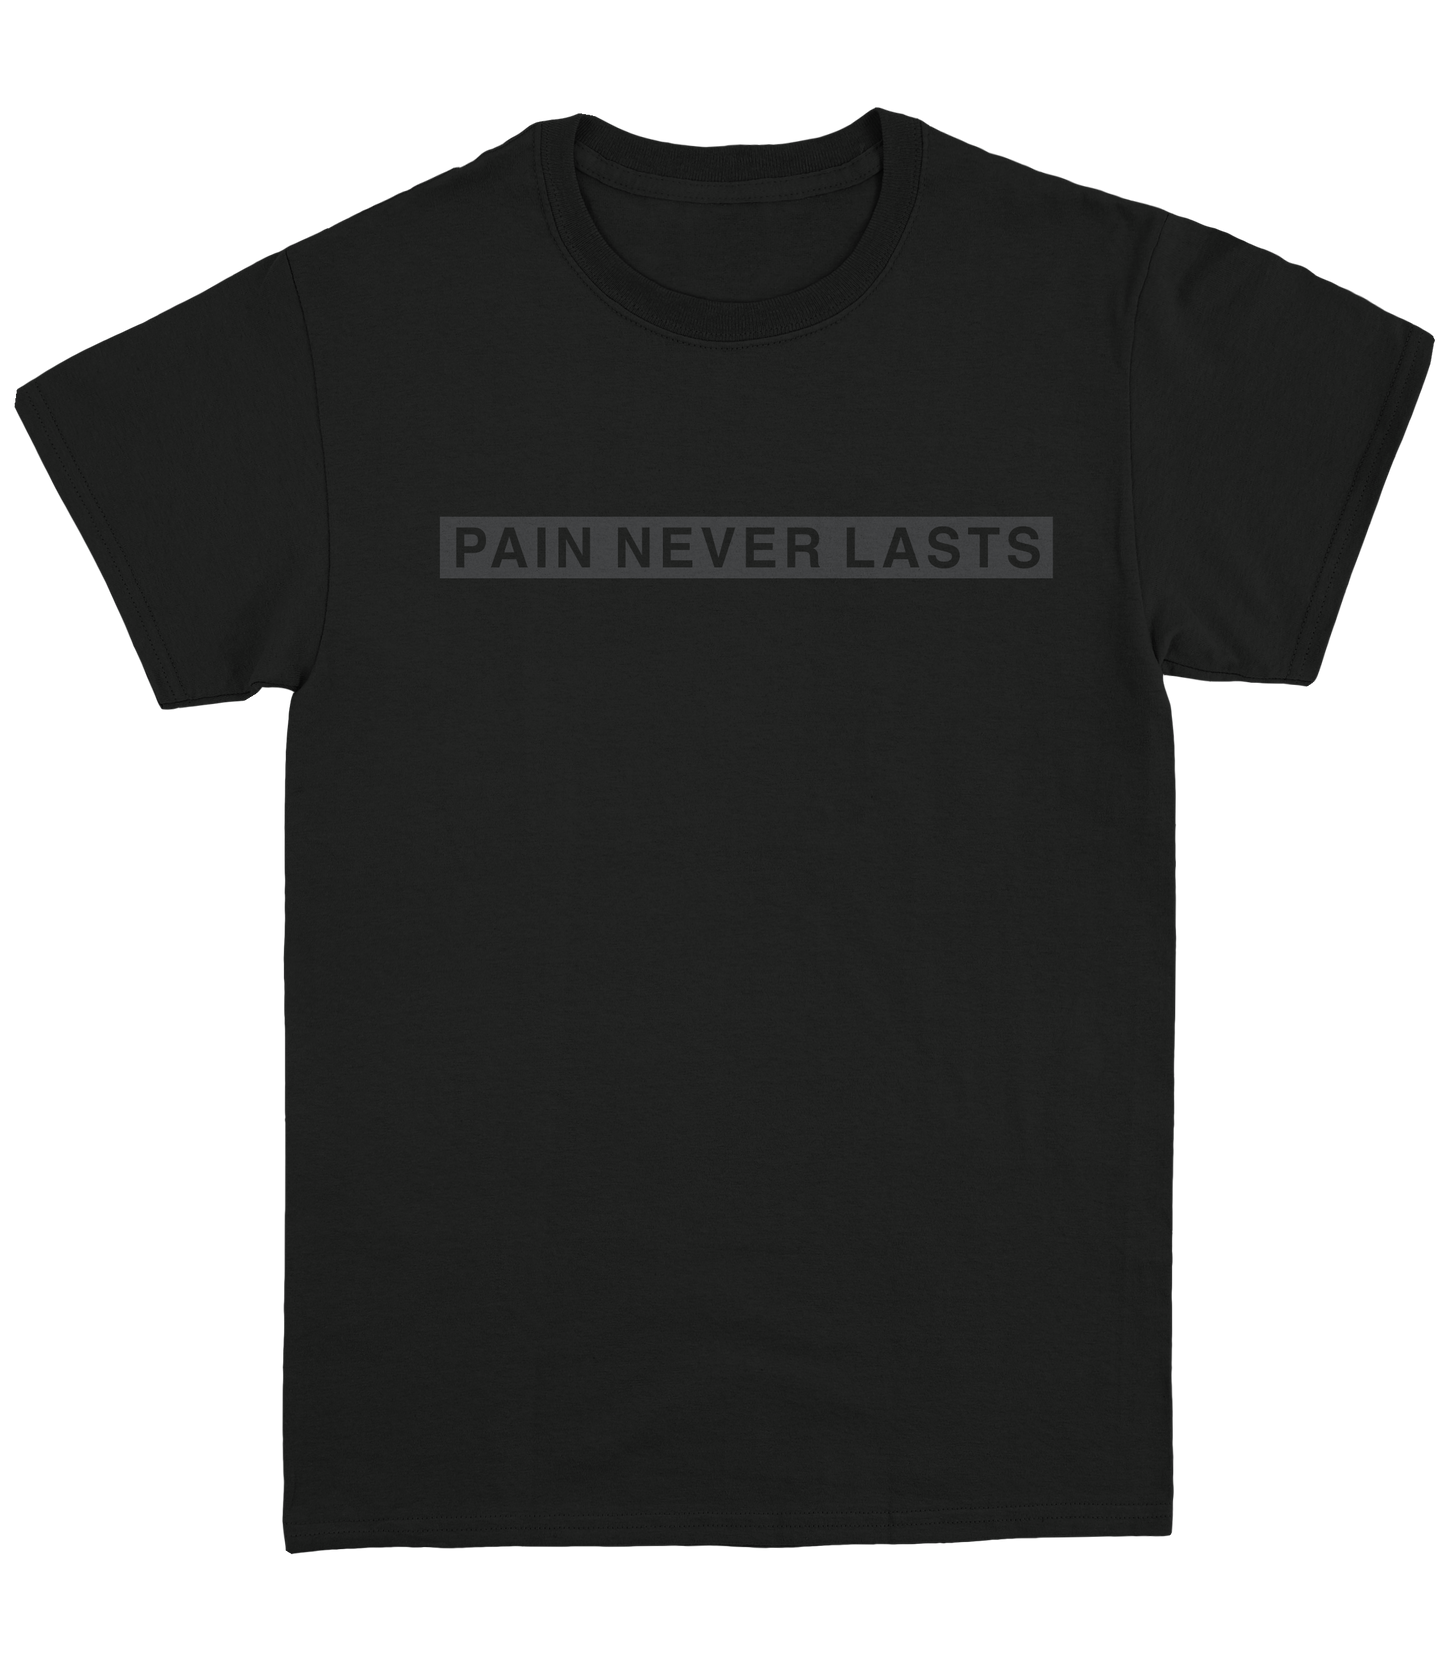 Pain Never Lasts "Black Collection" T-Shirt